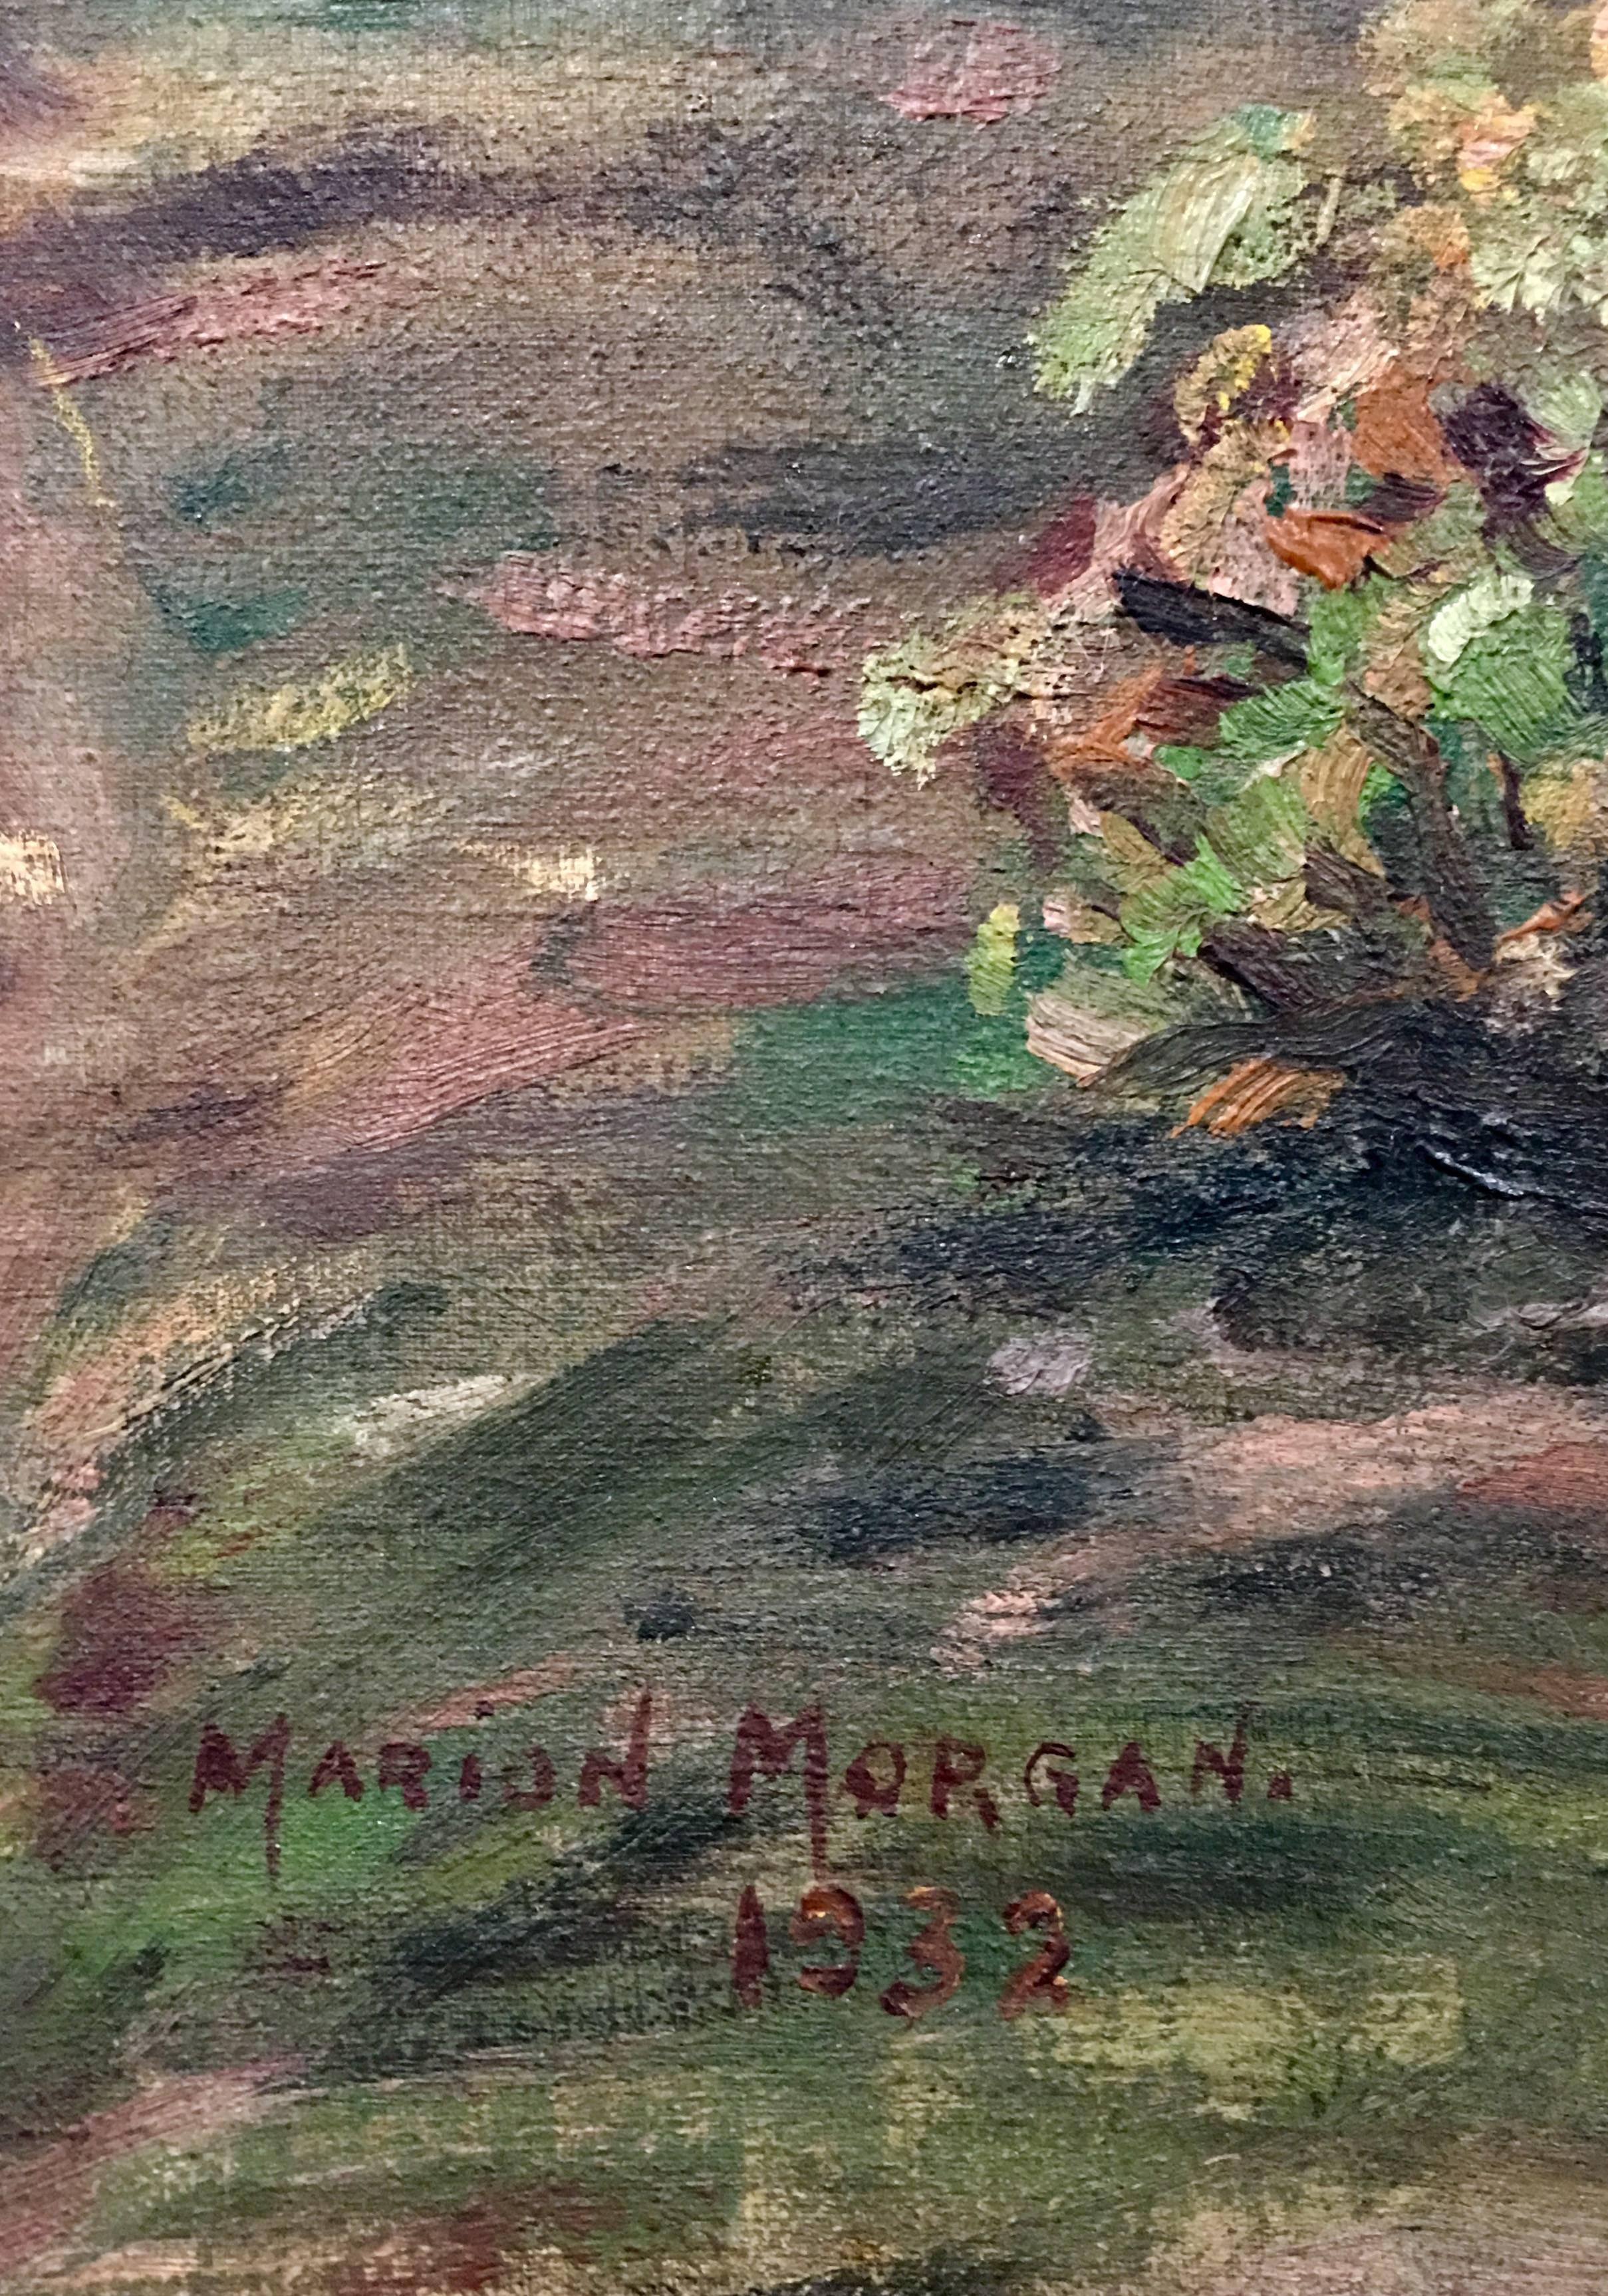 1932 Original Oil on Canvas Painting by, Marion Morgan For Sale 4